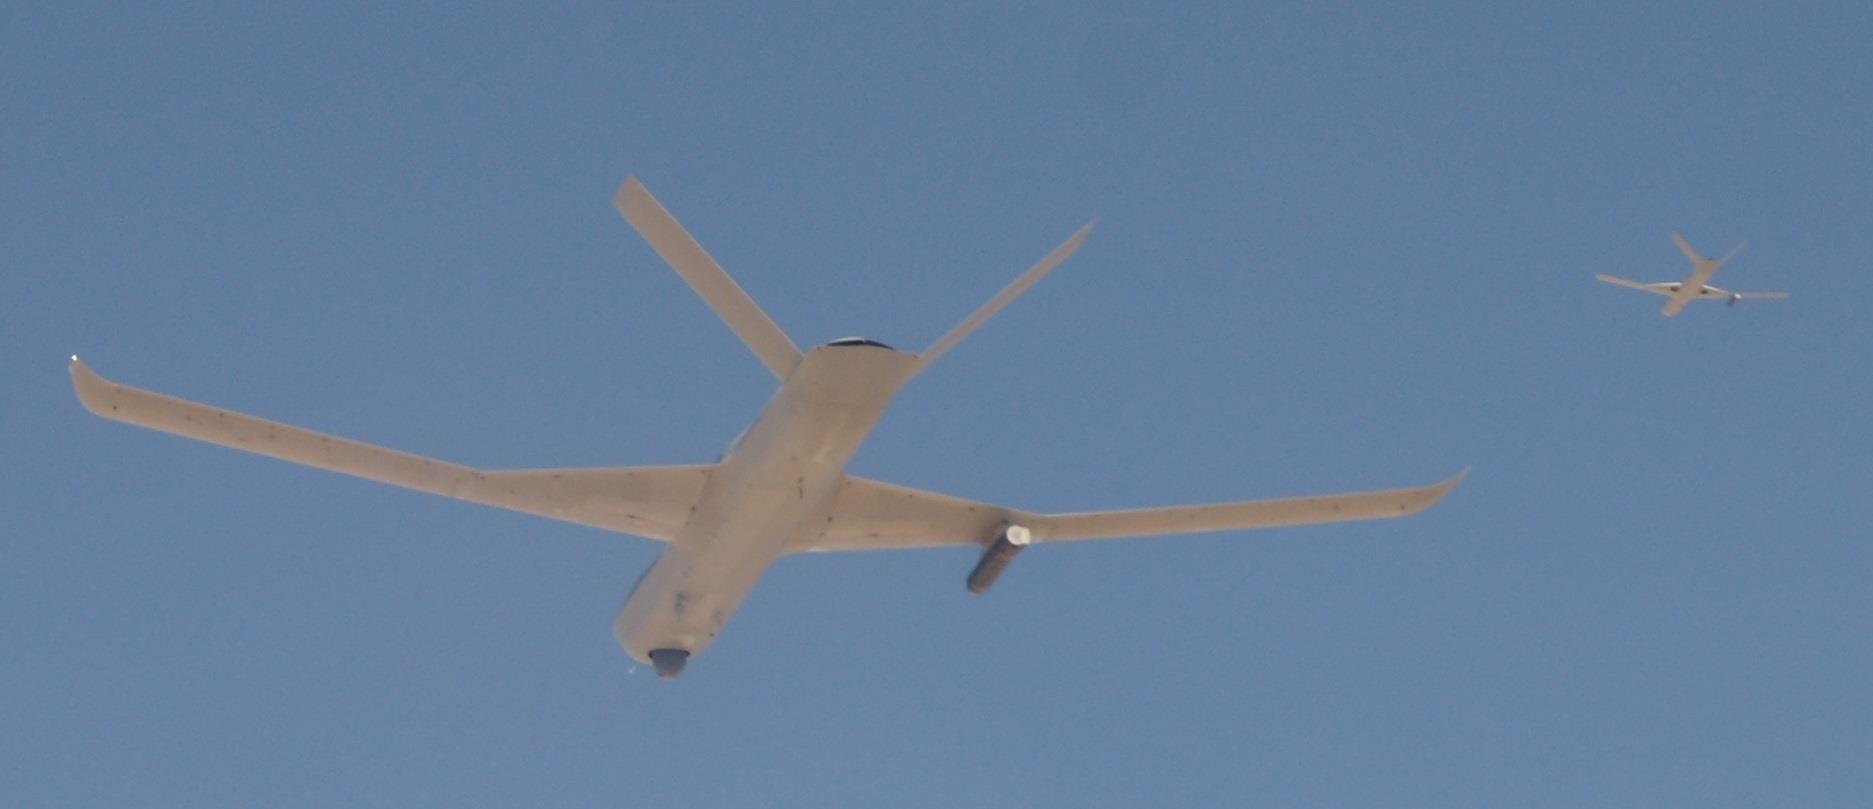 Two General Atomics MQ-20 Avengers coordinate flight with Skyborg software | News | Global